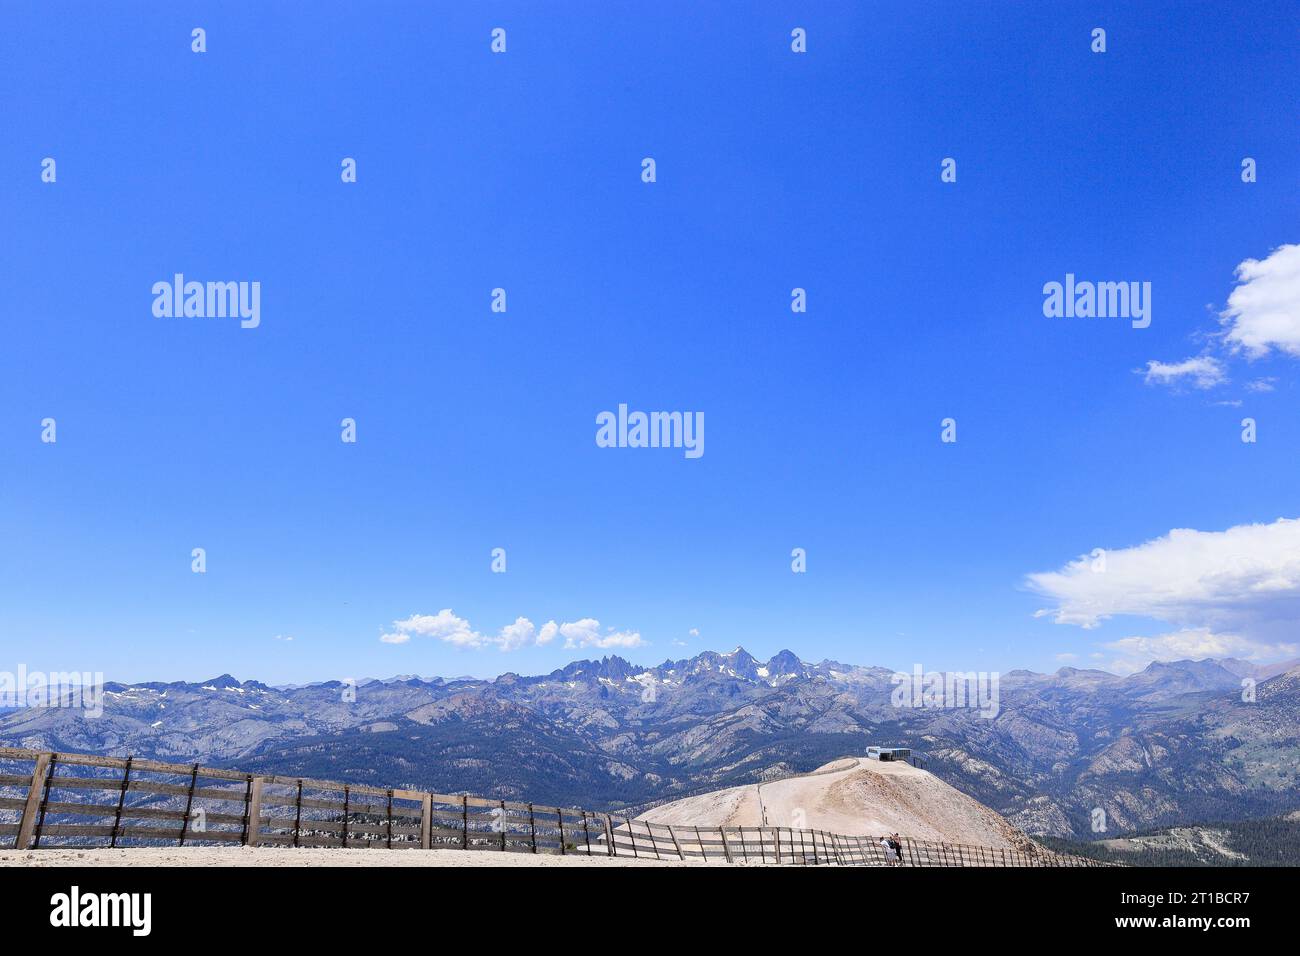 A vast view from the top of Mammoth mountain in Mammoth Lakes, California during a summer time. Stock Photo